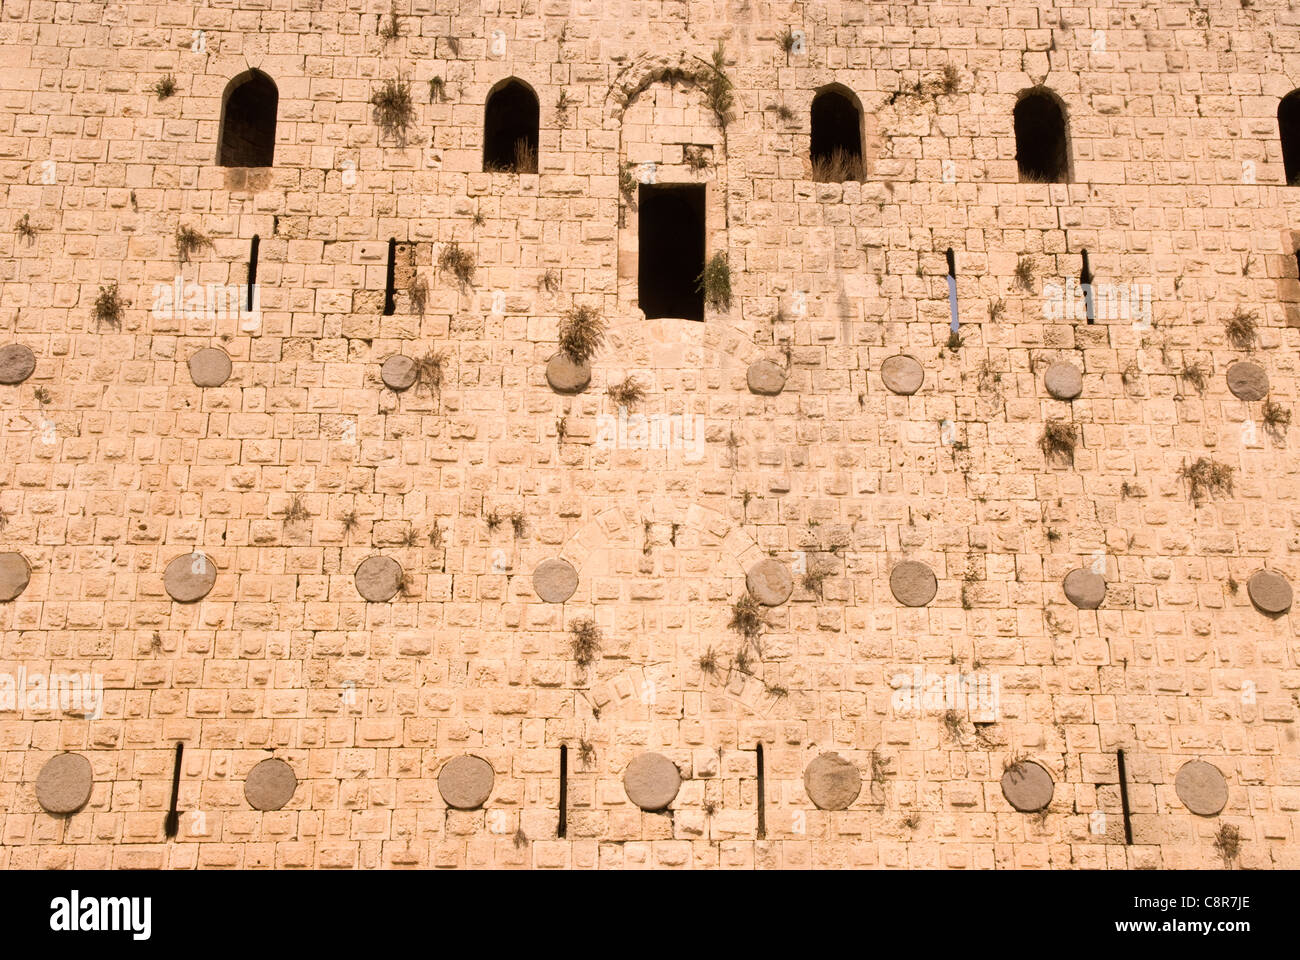 Wall of the Burj es-Sabaa (Lion's Tower) dating from Mamluk period, Tripoli (Trablous), north Lebanon. Stock Photo